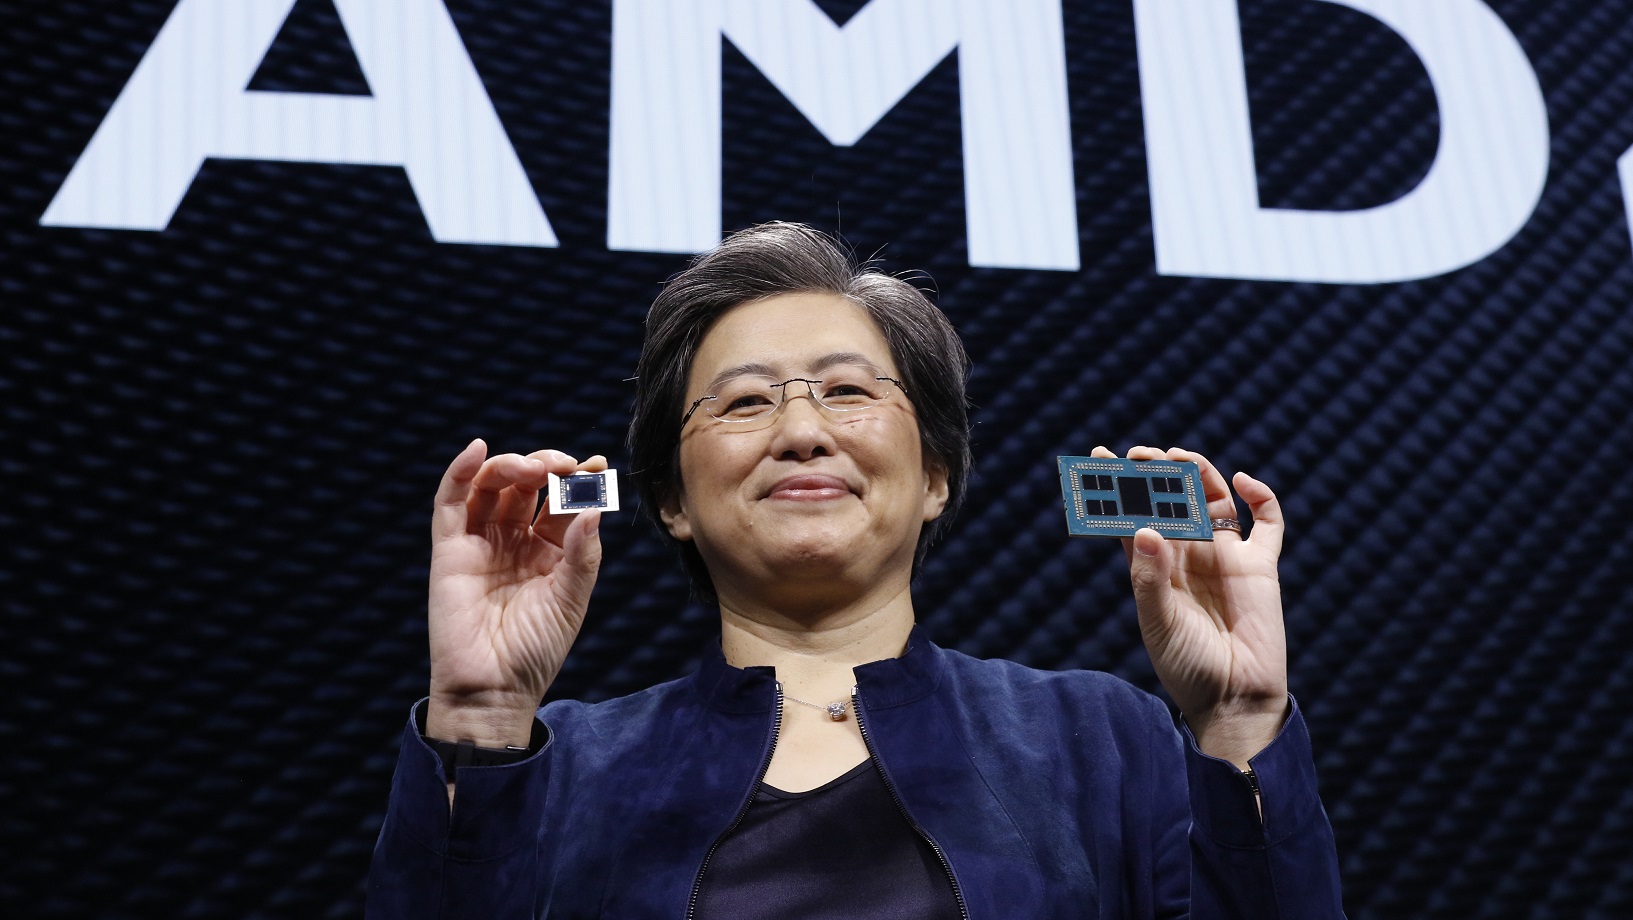 According to CEO of AMD, Lisa Su, the global chip shortage may last till late 2022